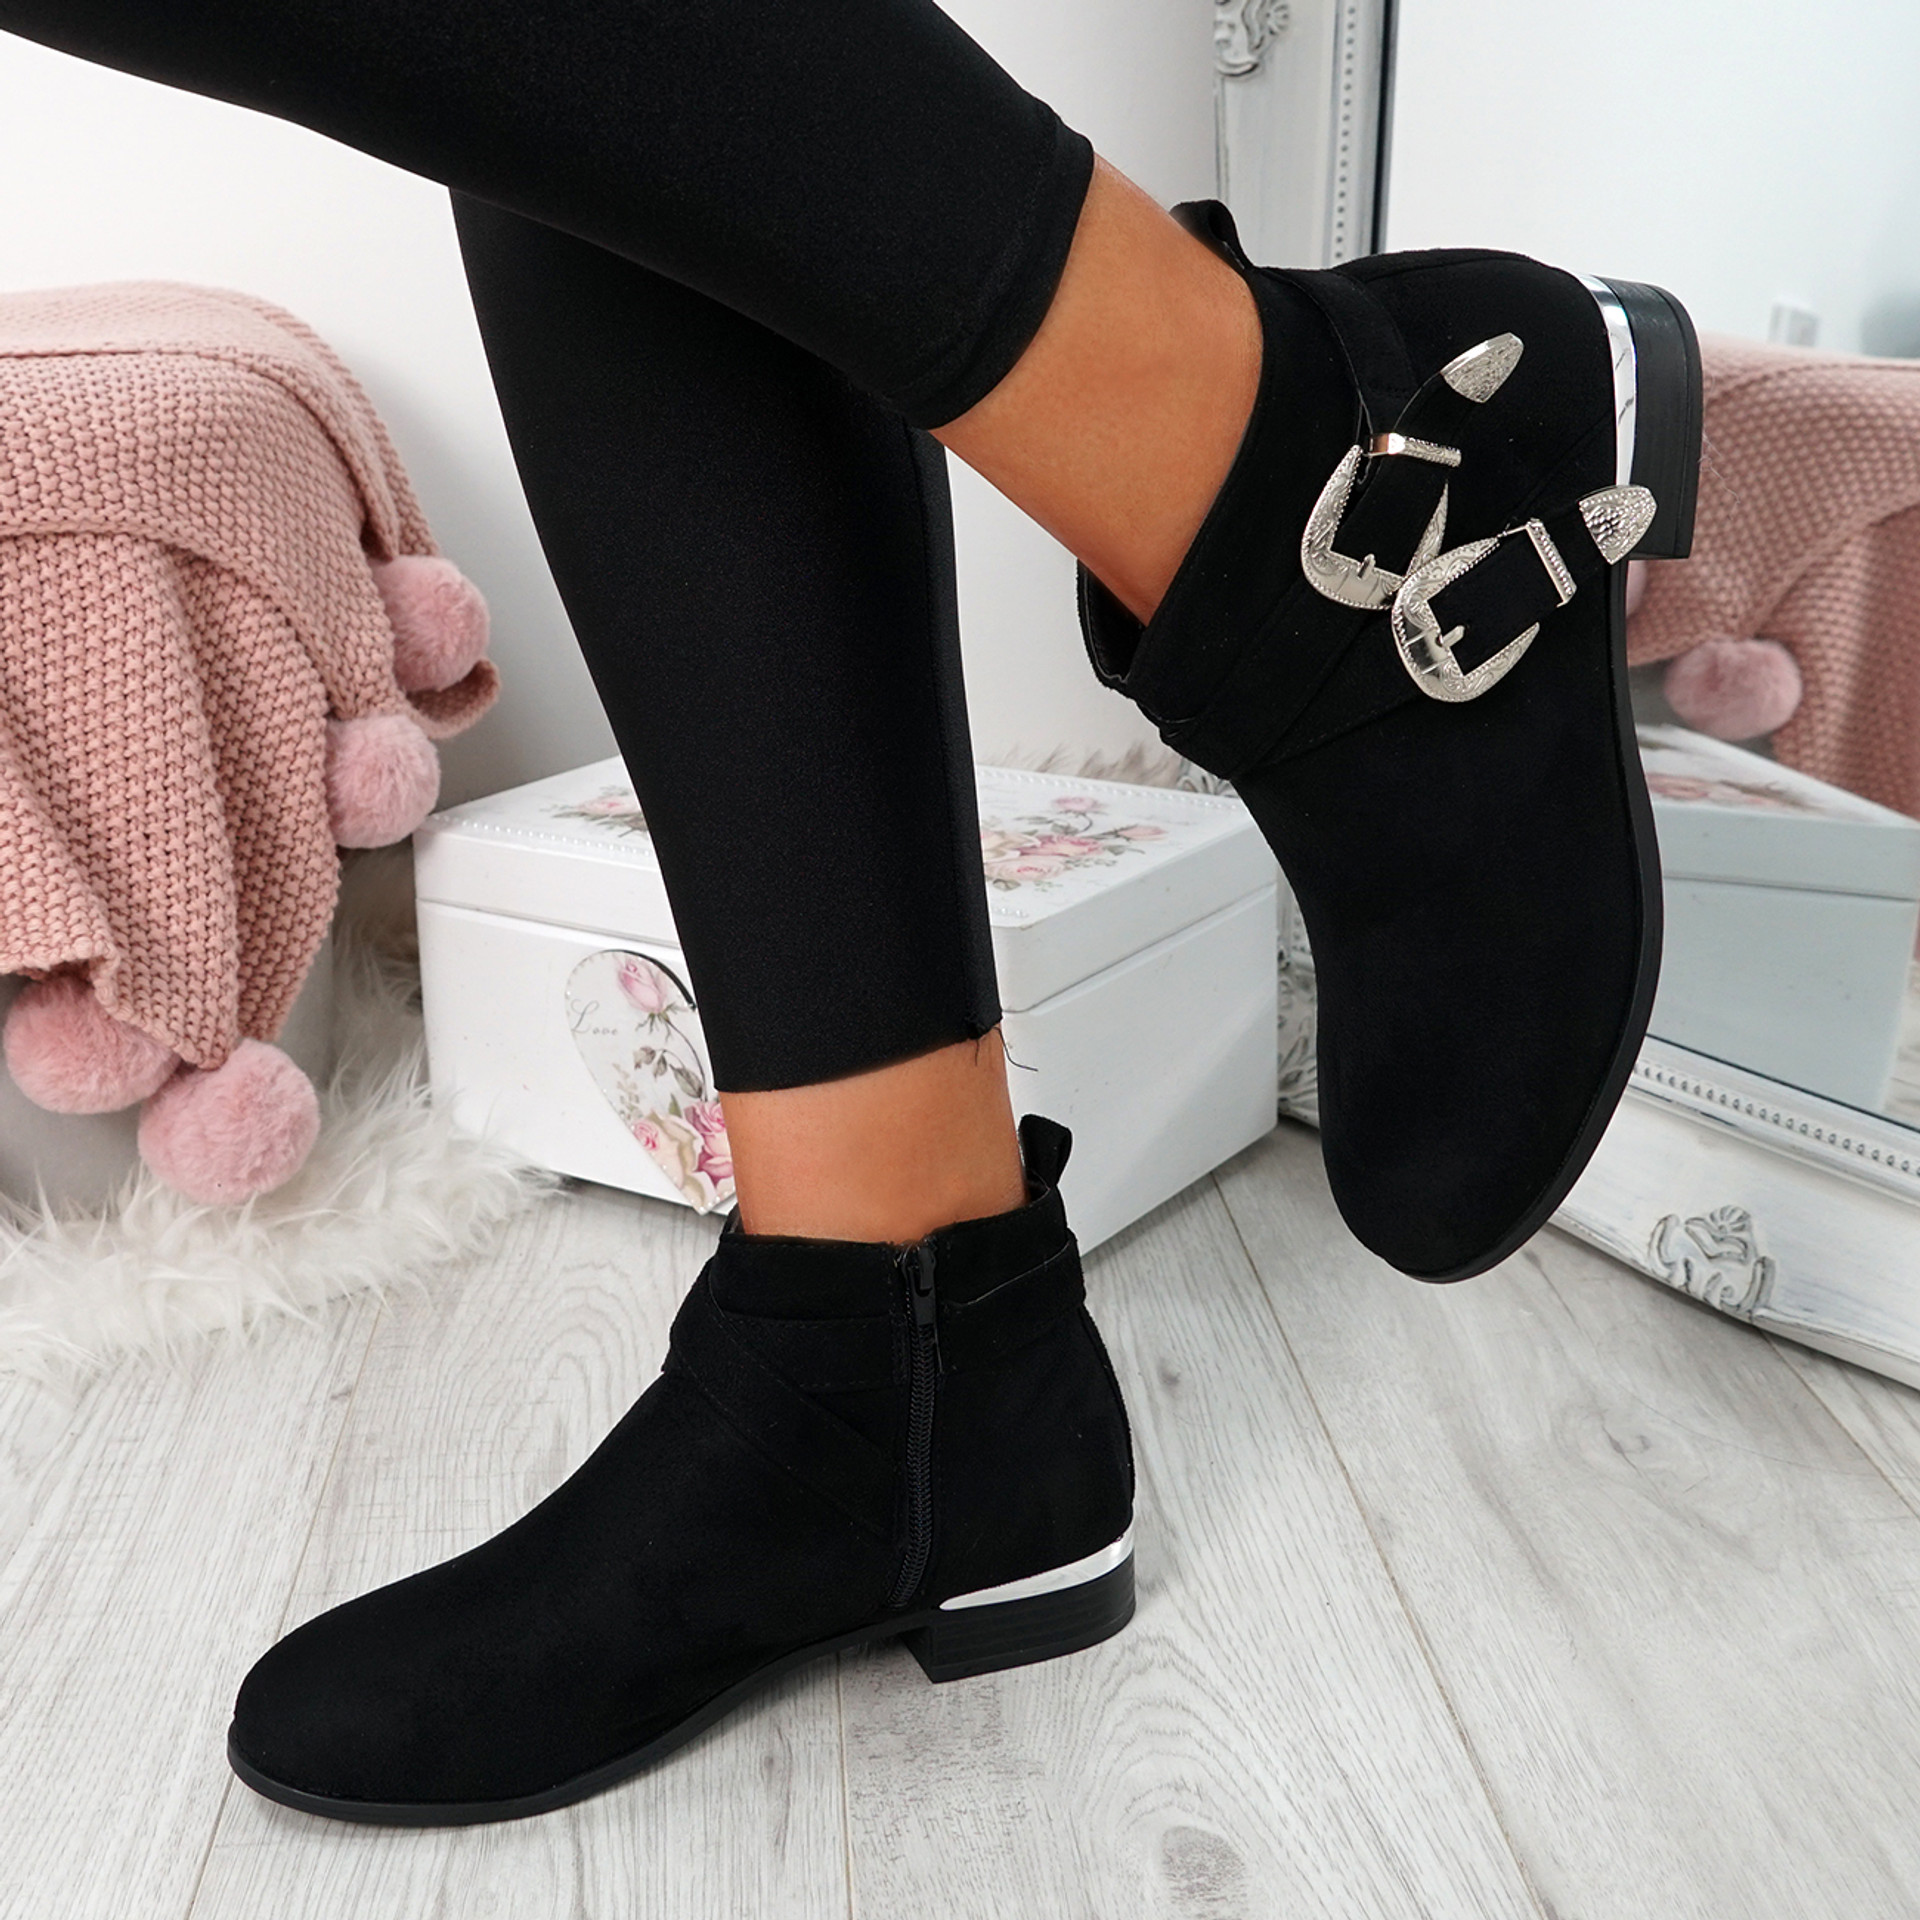 Giry Black Buckle Ankle Boots